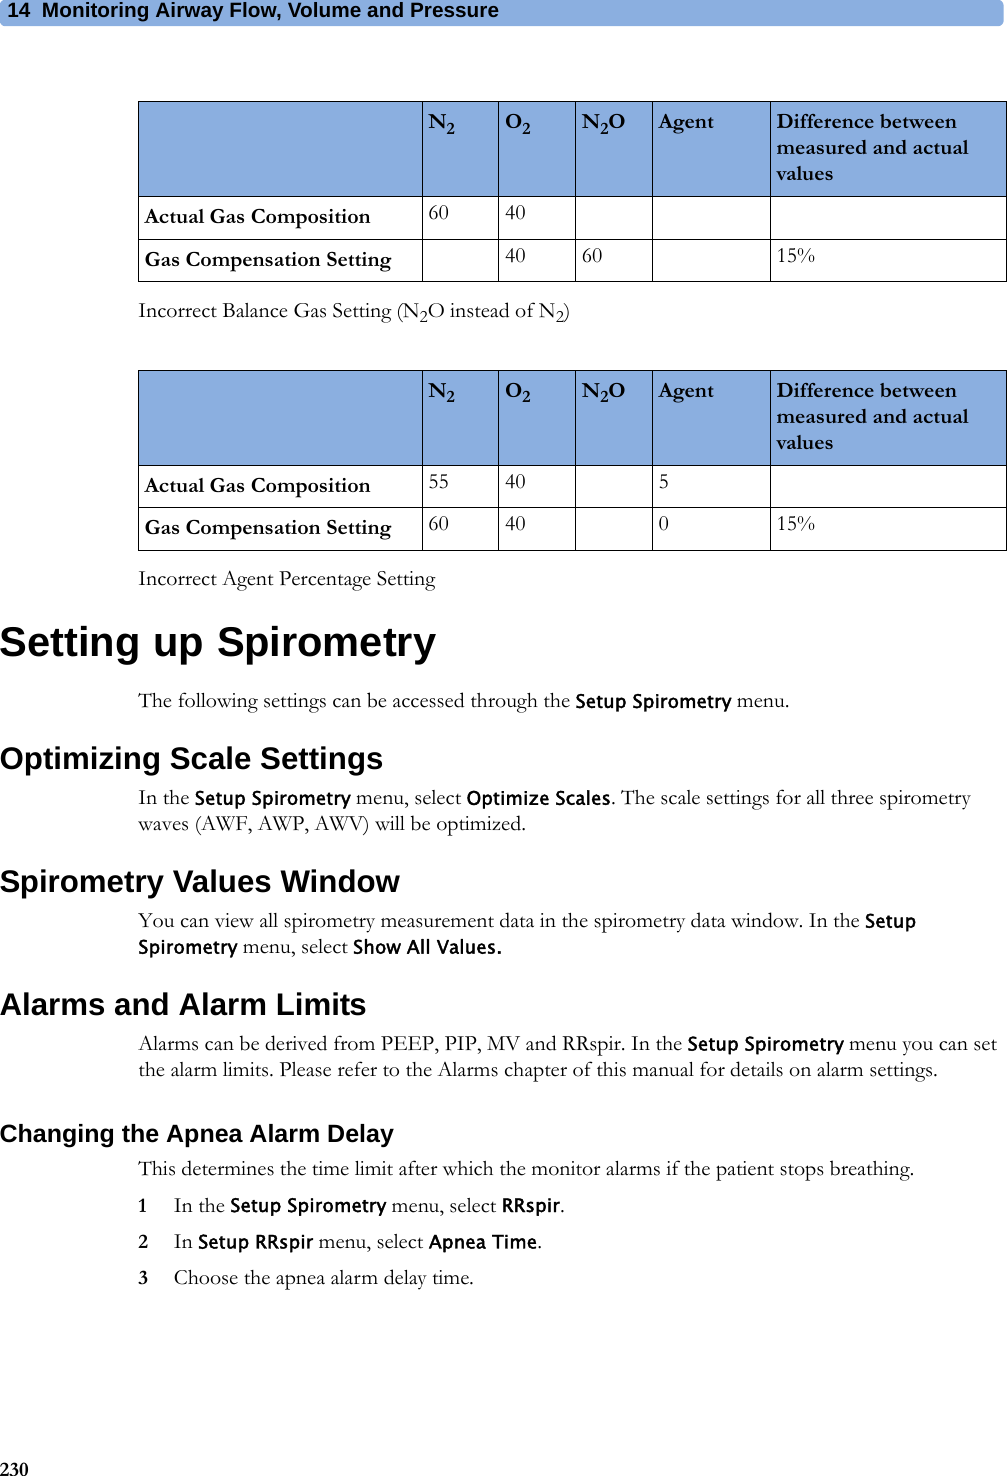 14 Monitoring Airway Flow, Volume and Pressure230Incorrect Balance Gas Setting (N2O instead of N2)Incorrect Agent Percentage SettingSetting up SpirometryThe following settings can be accessed through the Setup Spirometry menu.Optimizing Scale SettingsIn the Setup Spirometry menu, select Optimize Scales. The scale settings for all three spirometry waves (AWF, AWP, AWV) will be optimized.Spirometry Values WindowYou can view all spirometry measurement data in the spirometry data window. In the Setup Spirometry menu, select Show All Values.Alarms and Alarm LimitsAlarms can be derived from PEEP, PIP, MV and RRspir. In the Setup Spirometry menu you can set the alarm limits. Please refer to the Alarms chapter of this manual for details on alarm settings.Changing the Apnea Alarm DelayThis determines the time limit after which the monitor alarms if the patient stops breathing.1In the Setup Spirometry menu, select RRspir.2In Setup RRspir menu, select Apnea Time.3Choose the apnea alarm delay time.N2O2N2OAgent Difference between measured and actual valuesActual Gas Composition 60 40Gas Compensation Setting 40 60 15%N2O2N2OAgent Difference between measured and actual valuesActual Gas Composition 55 40 5Gas Compensation Setting 60 40 0 15%